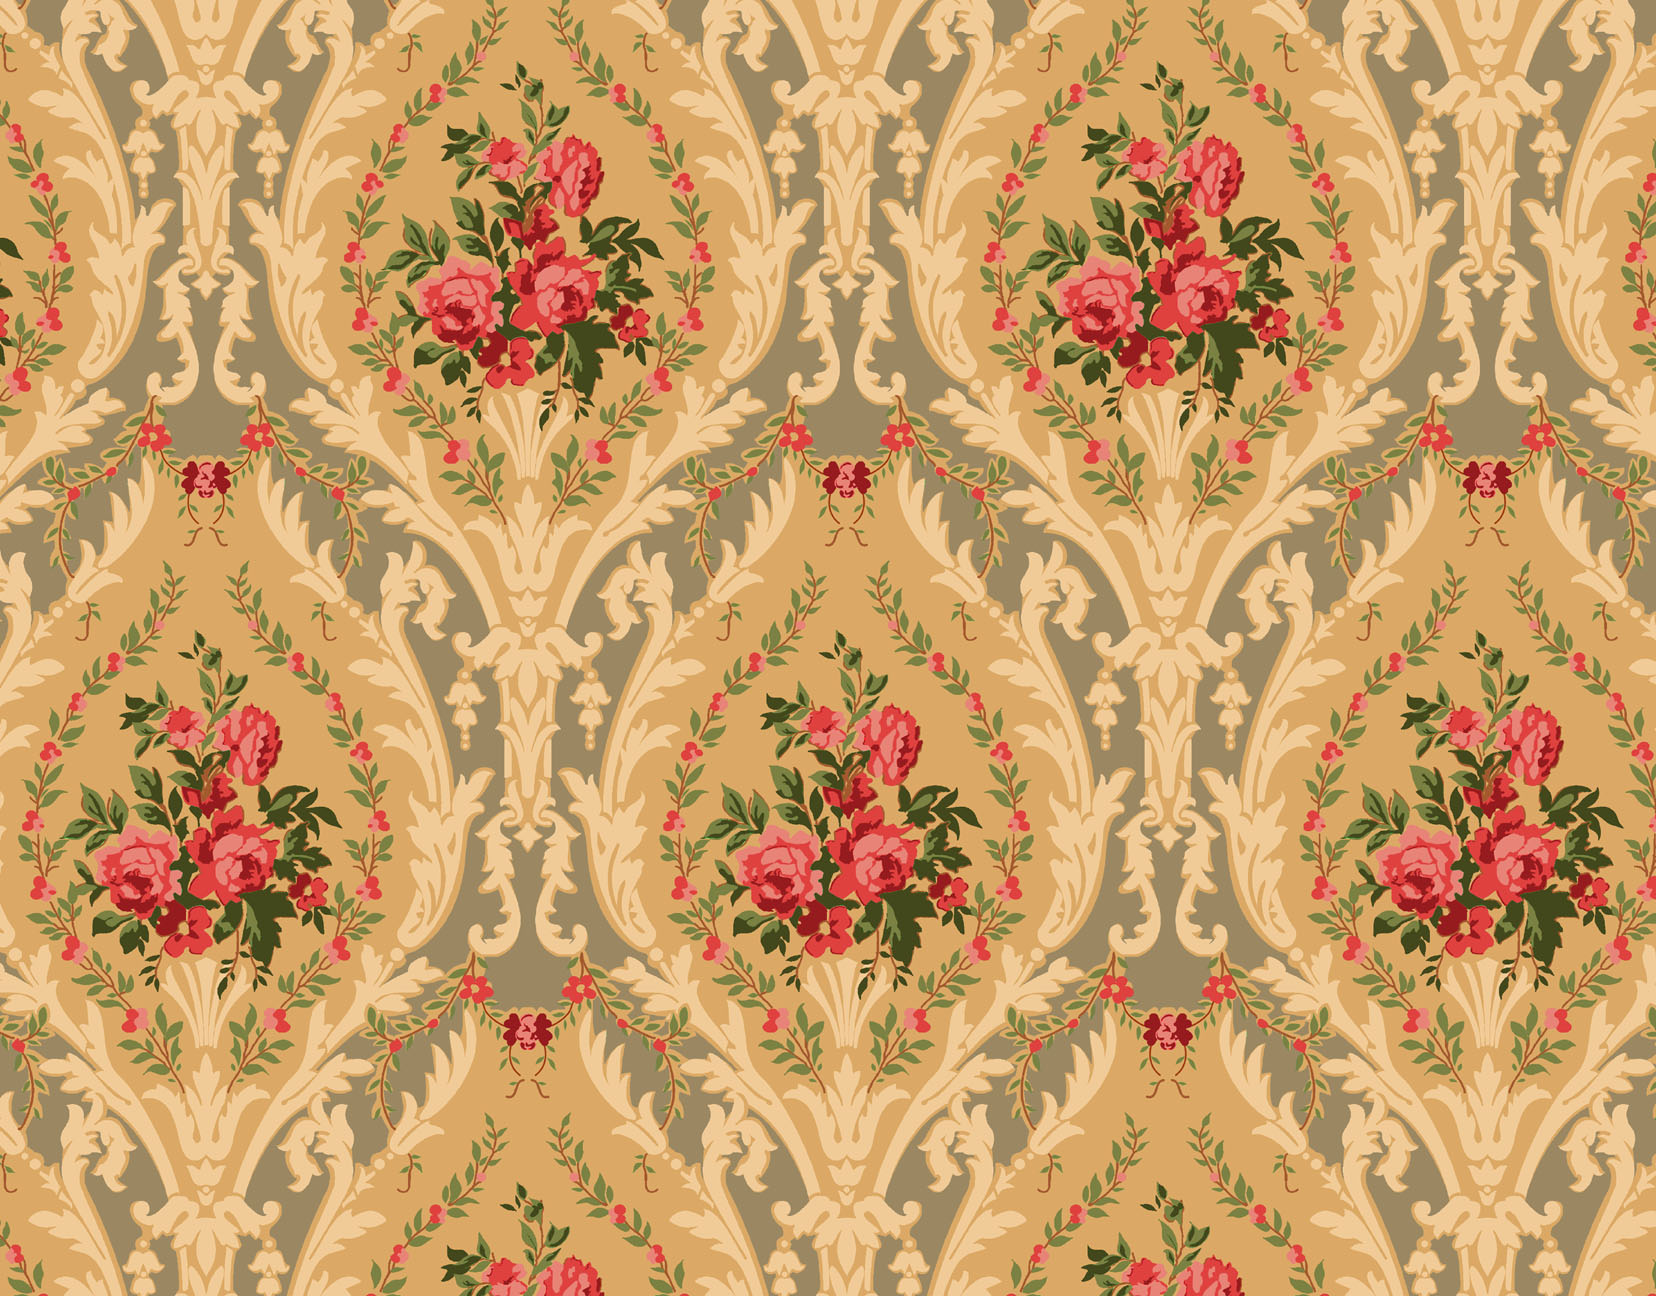  Crafts   Historic Wallpapers   Victorian Arts   Victorial Crafts